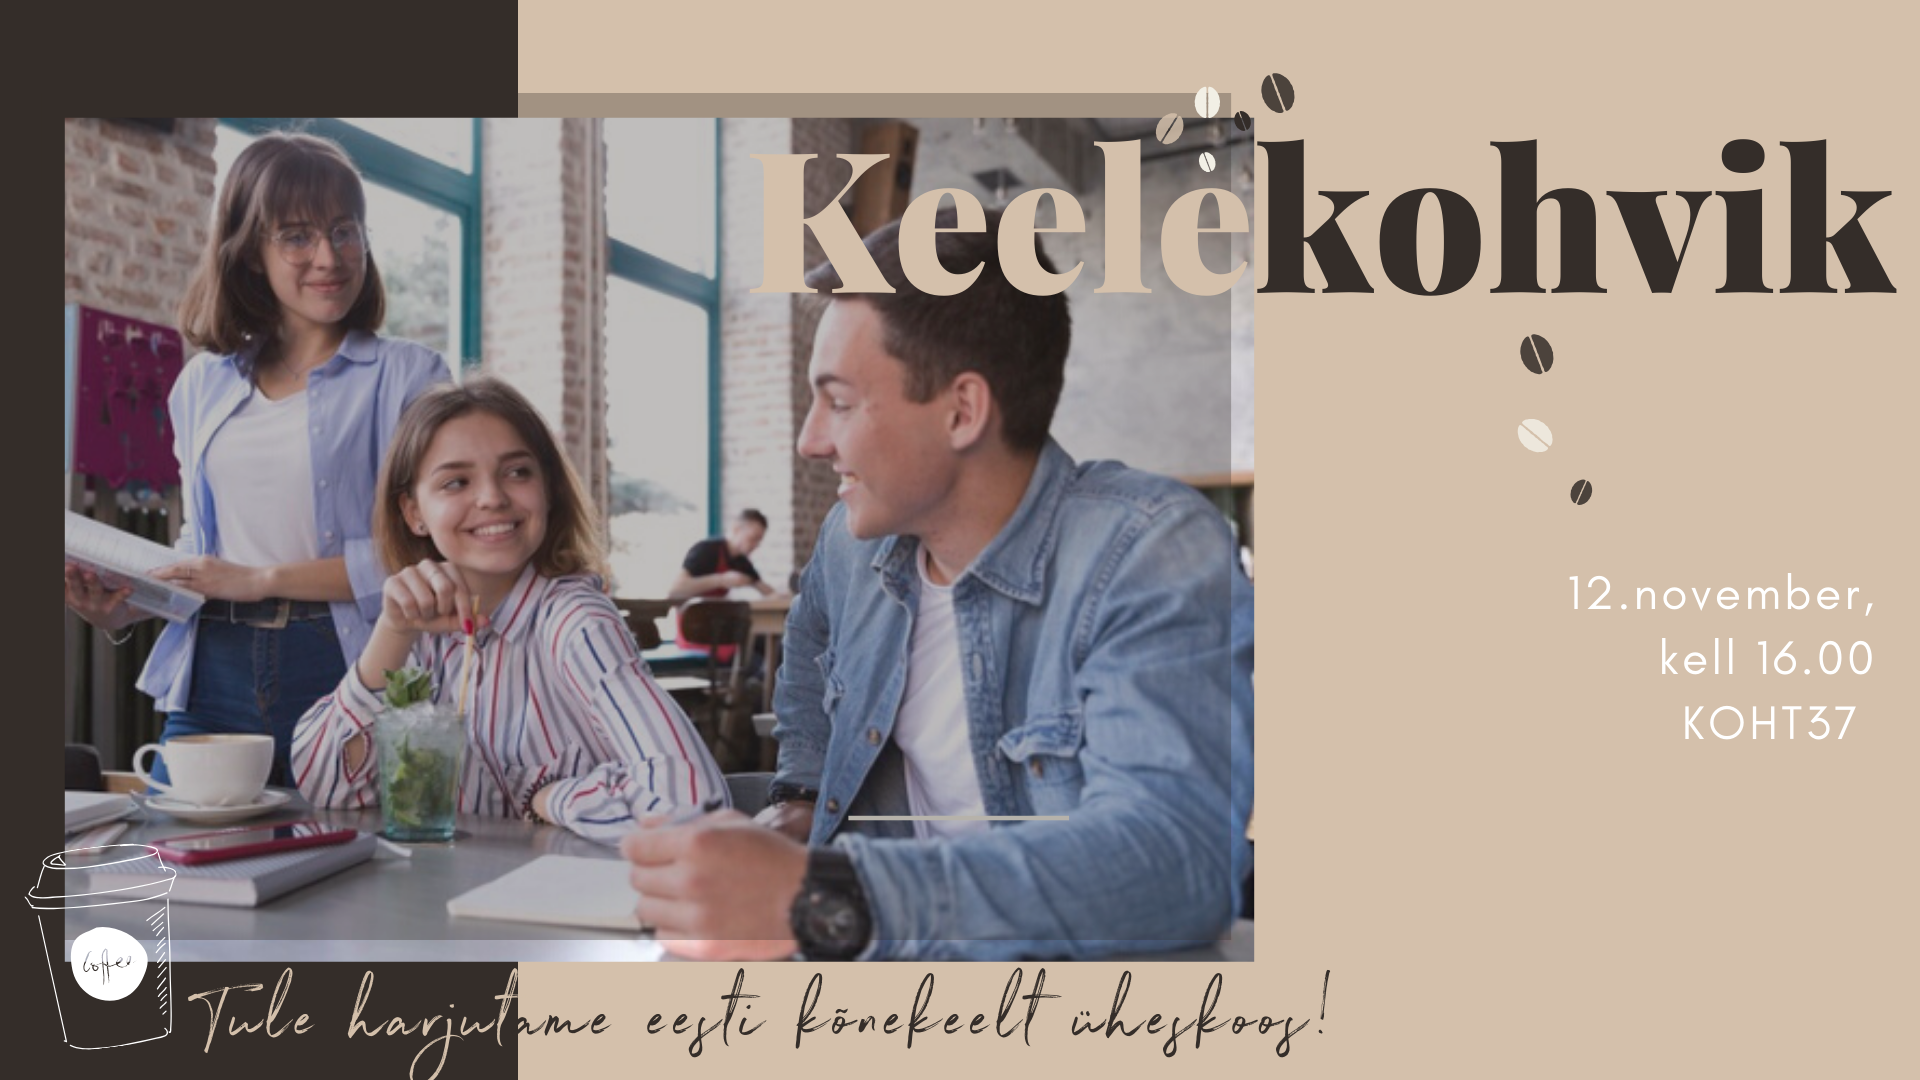 You are currently viewing Keelekohvik